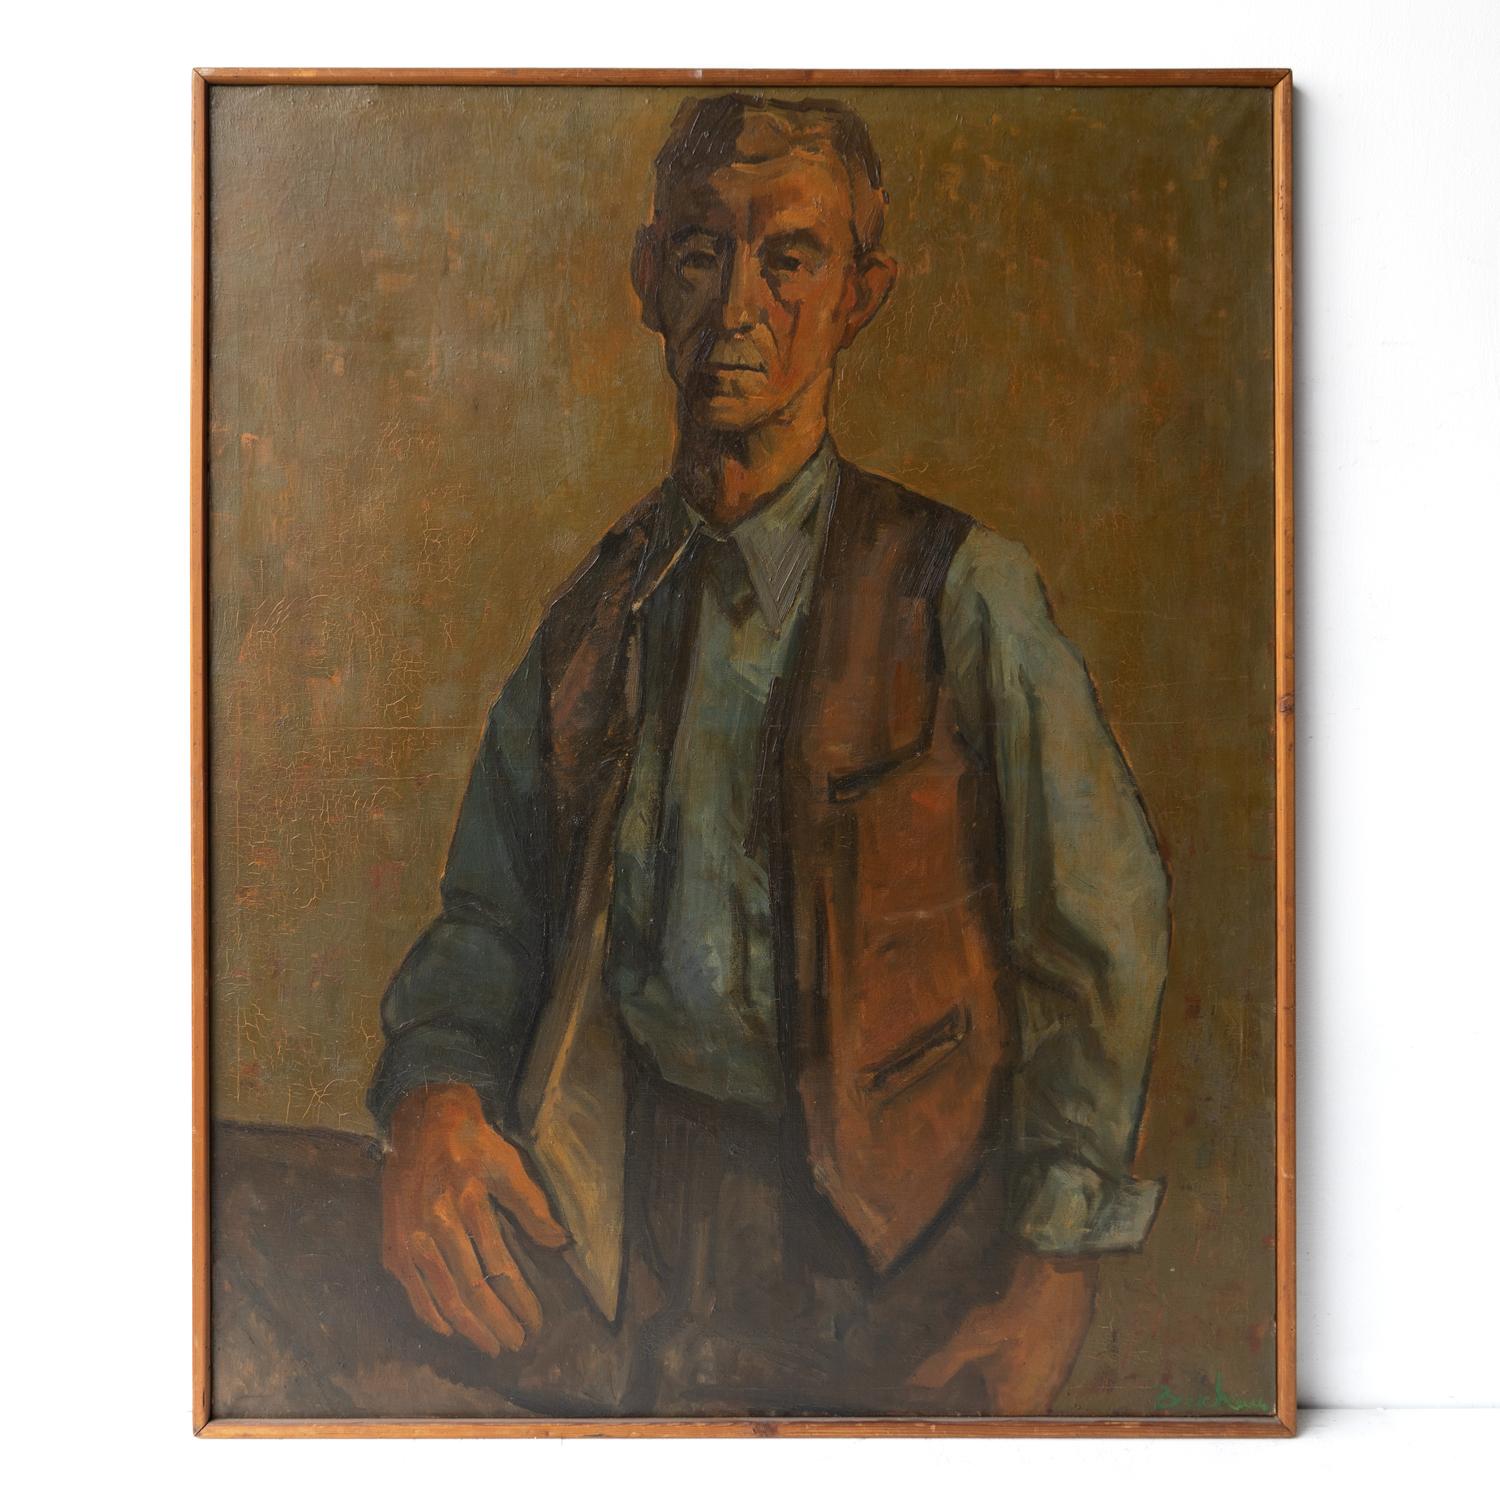 MID-CENTURY PORTRAIT PAINTING BY LUCIEN BRESCHEAU (1930-2020)
Depicting a man with a well-weathered face, a steely-eyed stare and pursed lips in a blue shirt and waistcoat. 

Painted in an expressionist style that really captures the character of